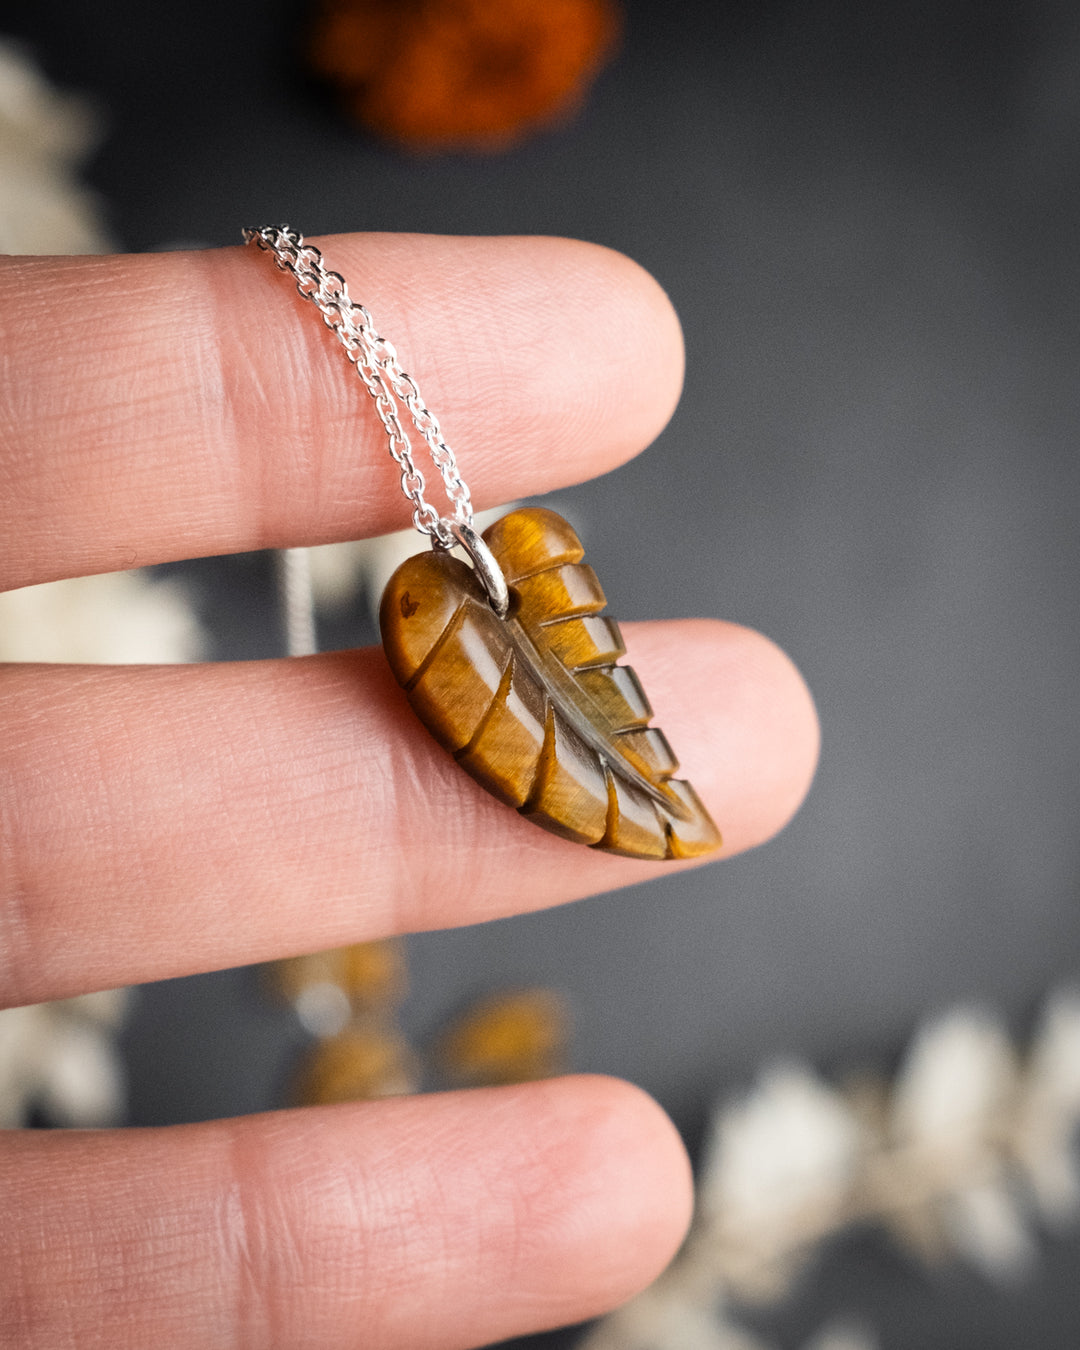 Tiger's Eye Hand Carved Leaf Necklace - The Healing Pear